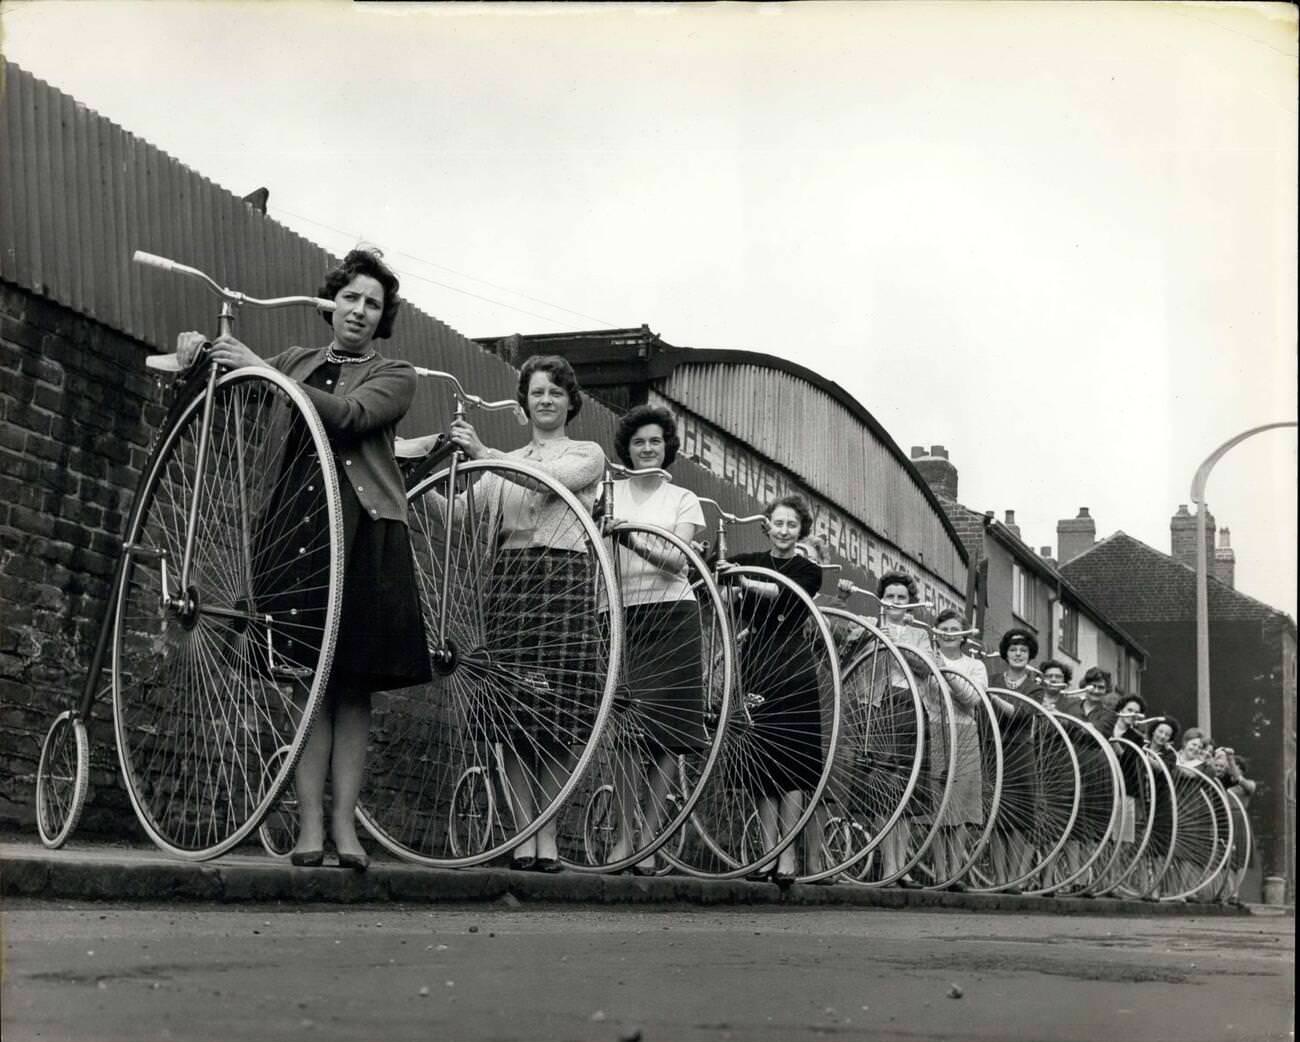 Penny-farthing bicycles, April 24, 1963